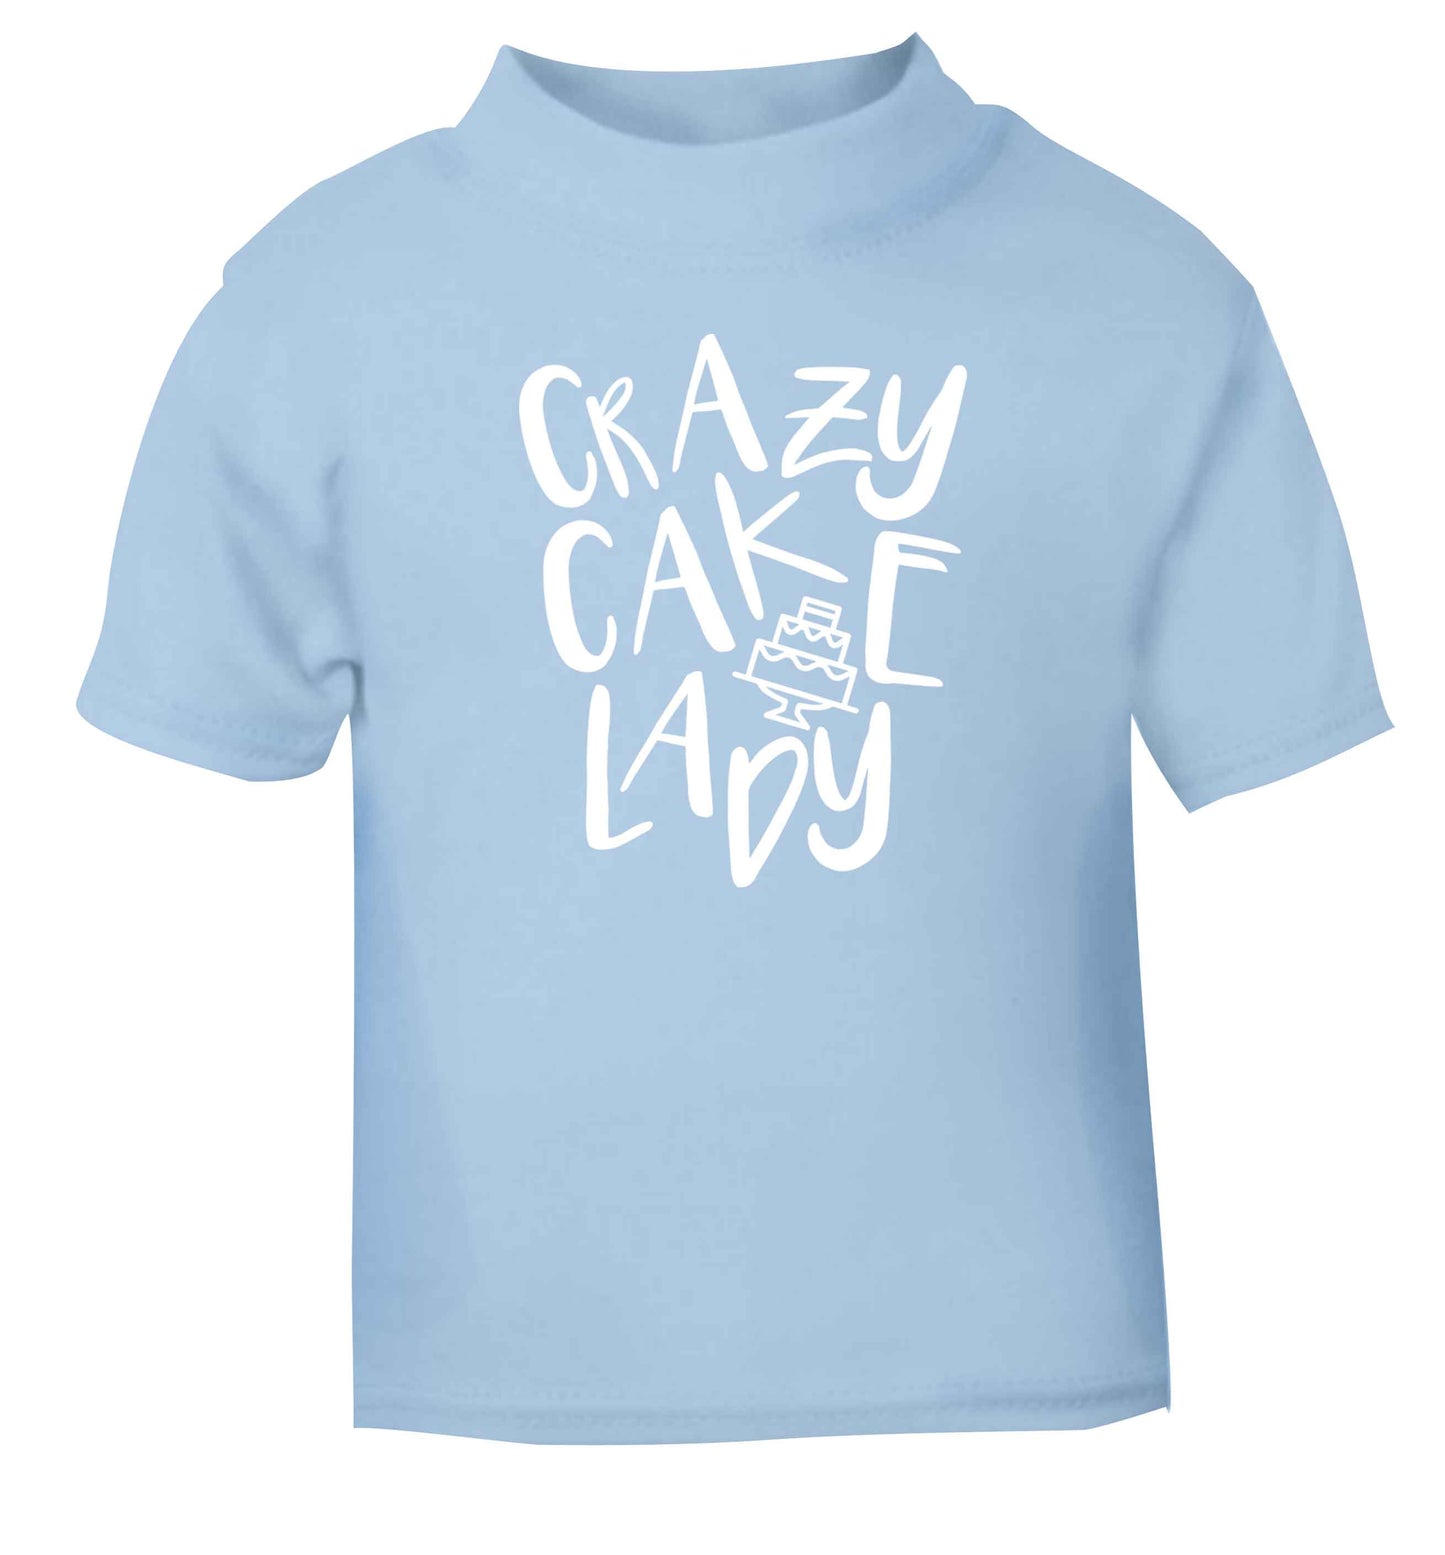 Crazy cake lady light blue Baby Toddler Tshirt 2 Years